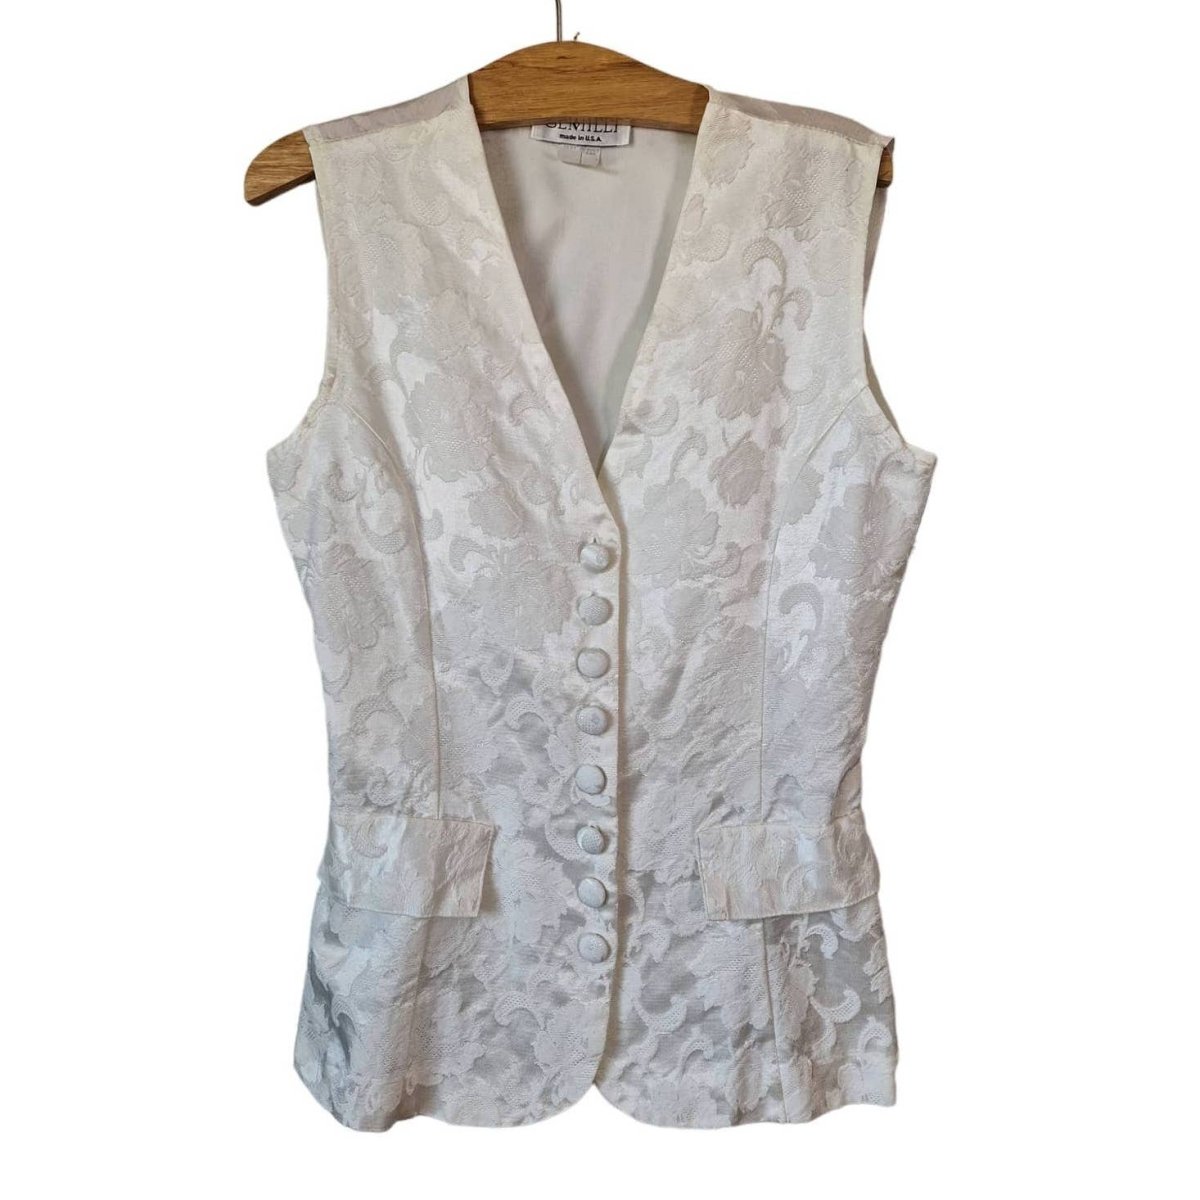 Vintage 80s Cream Embossed 8 Button Vest Women's Size M/L - themallvintage The Mall Vintage